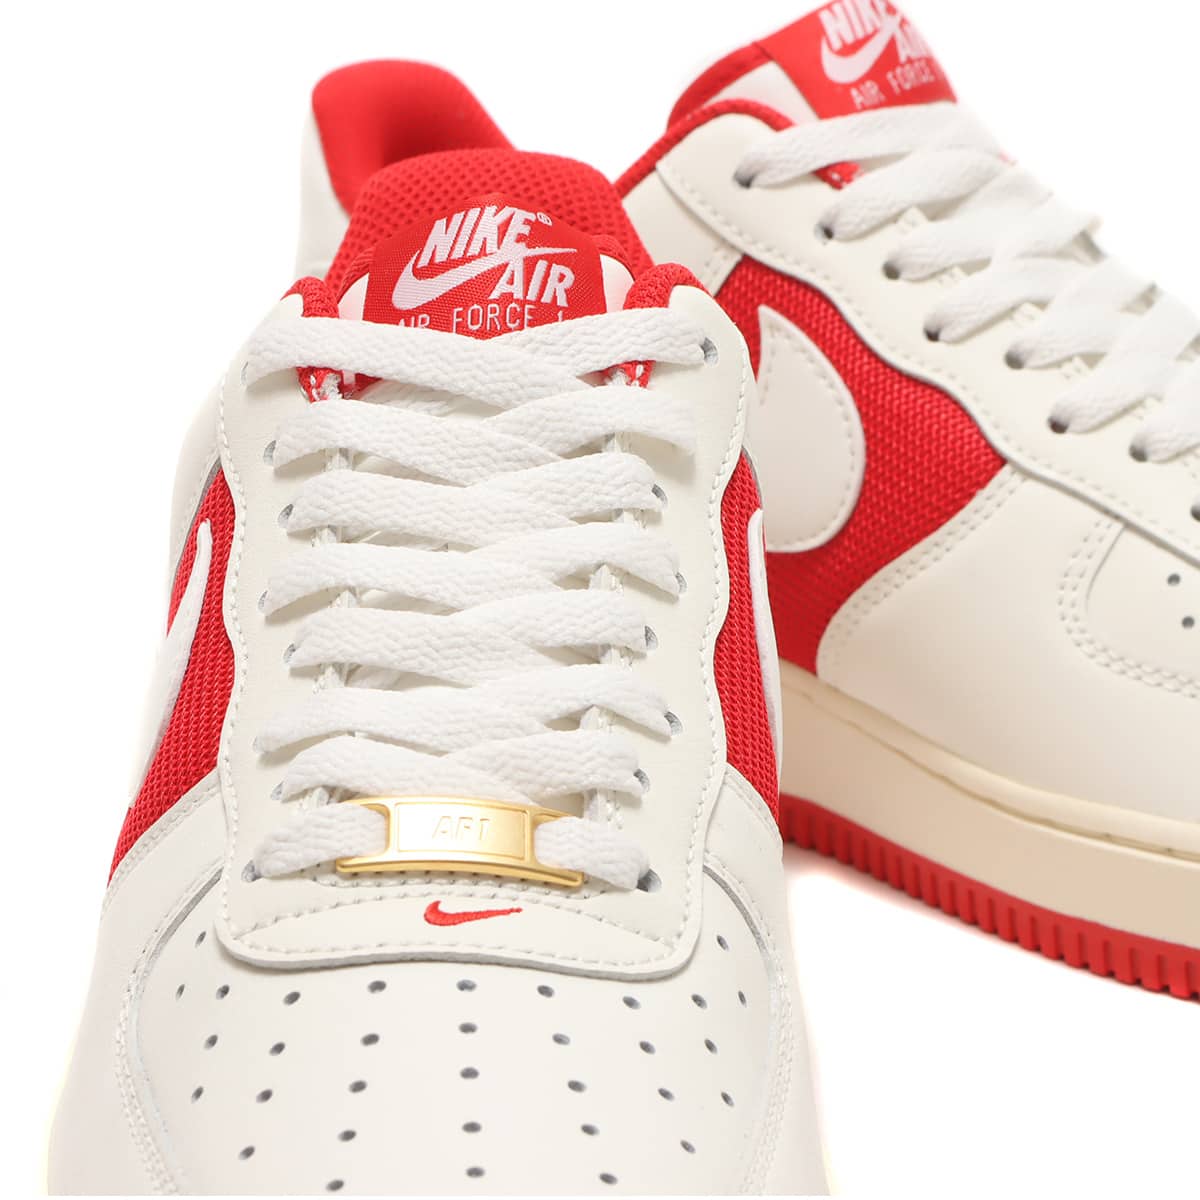 US8260cmカラーNIKE AIR FORCE 1 MID 07 RED SUEDE 26.0cm